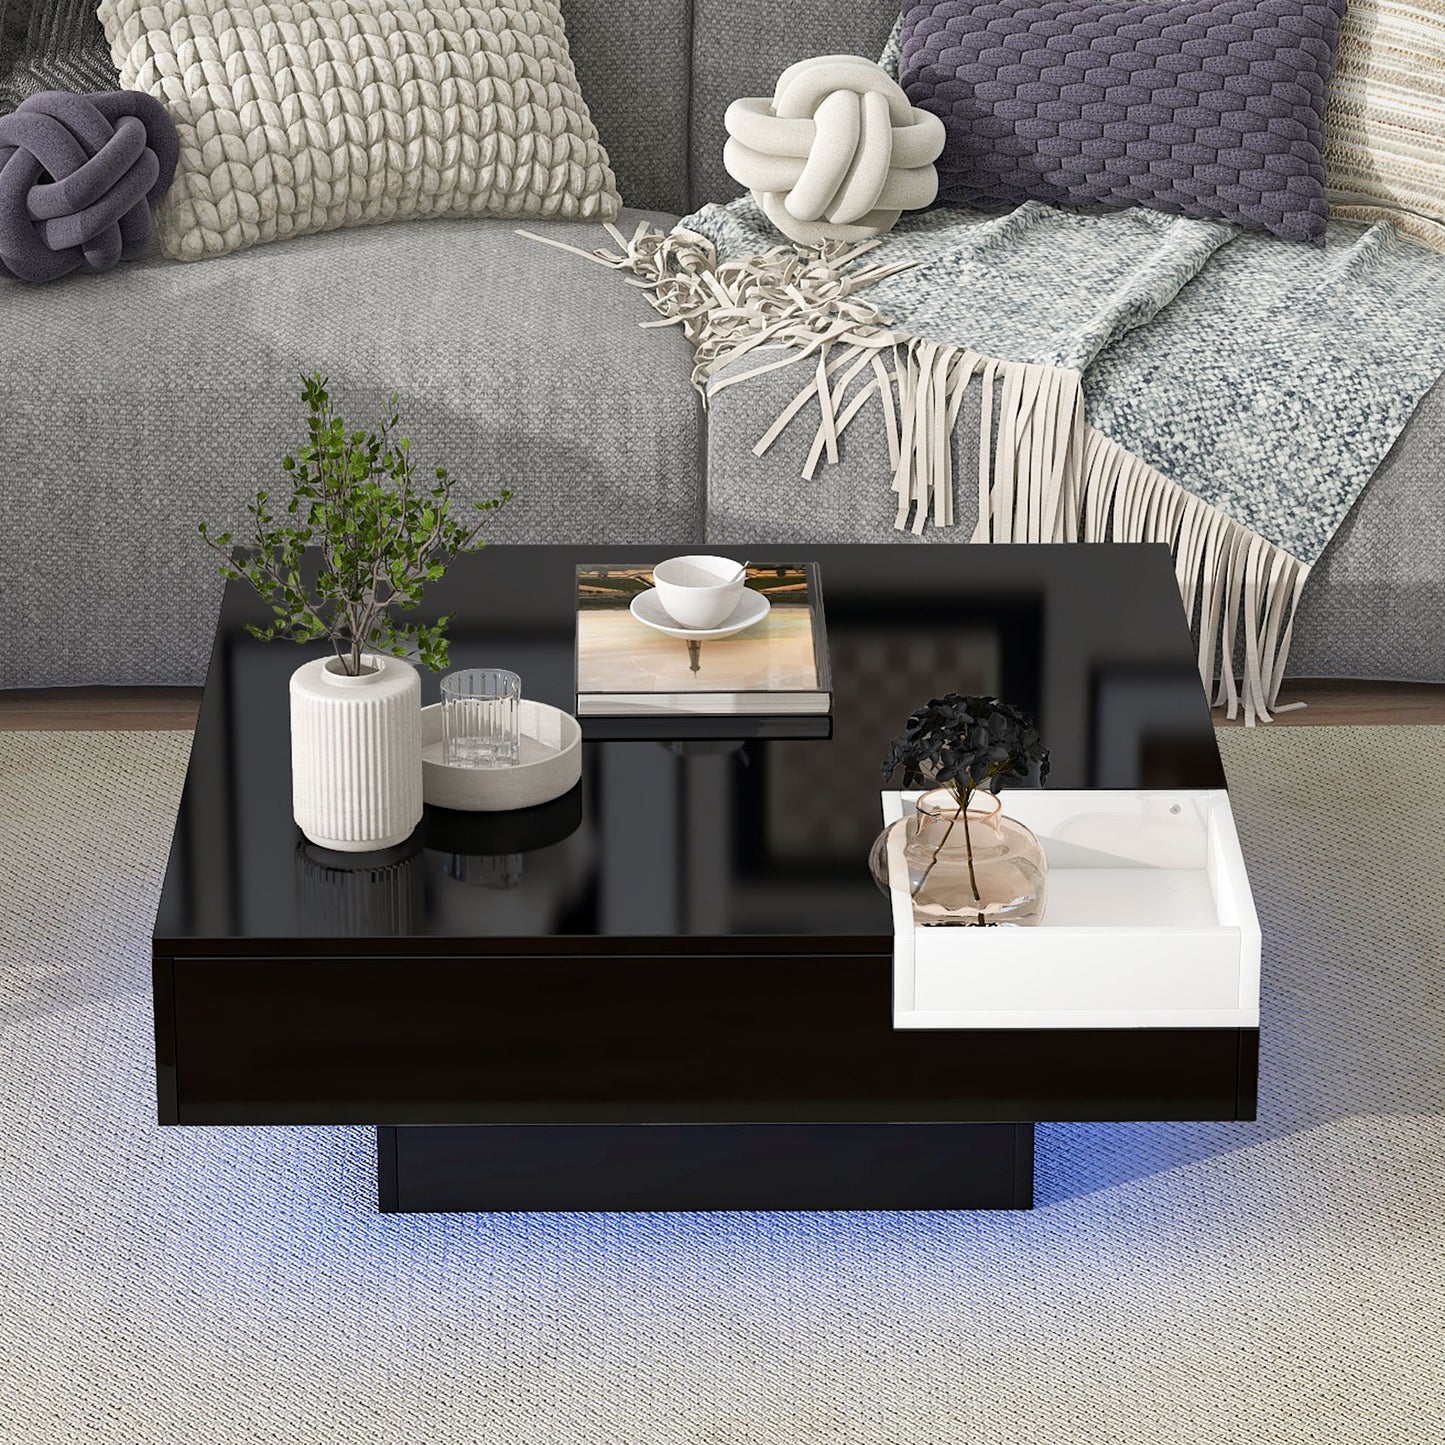 Square Coffee Table with LED Lights, HSUNNS Modern High Gloss White LED Coffee Table, End Side Table Sofa Centre Table with Detachable Tray|Remote Control 16 LED Lights, 31.5x31.5 in